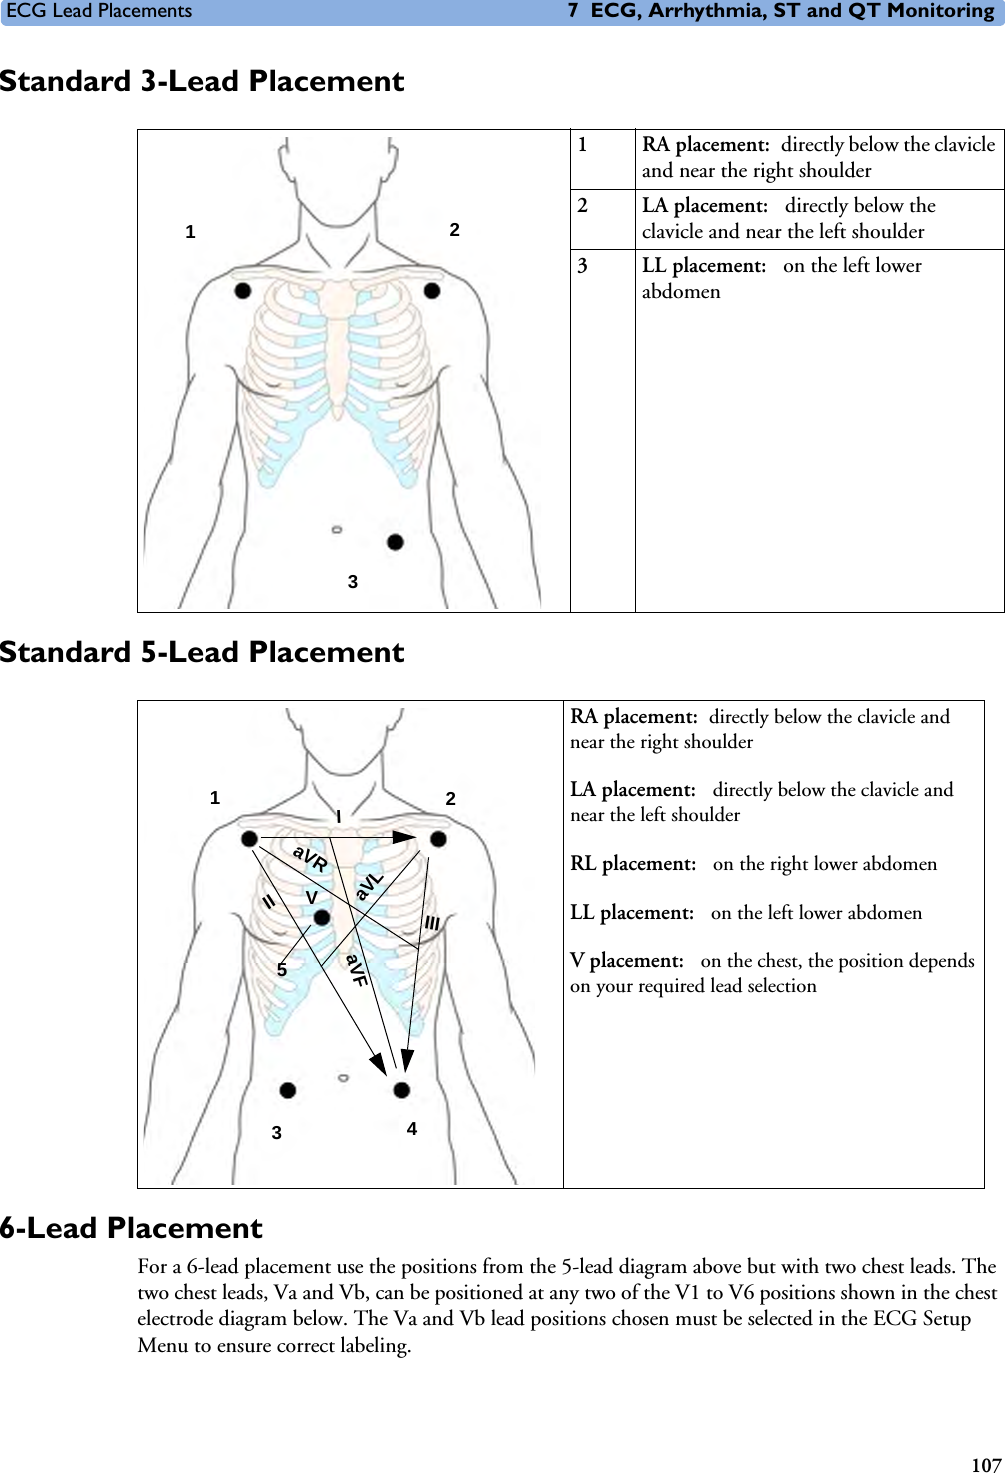 ECG Lead Placements 7 ECG, Arrhythmia, ST and QT Monitoring107Standard 3-Lead PlacementStandard 5-Lead Placement6-Lead PlacementFor a 6-lead placement use the positions from the 5-lead diagram above but with two chest leads. The two chest leads, Va and Vb, can be positioned at any two of the V1 to V6 positions shown in the chest electrode diagram below. The Va and Vb lead positions chosen must be selected in the ECG Setup Menu to ensure correct labeling. 1 RA placement: directly below the clavicle and near the right shoulder2 LA placement:  directly below the clavicle and near the left shoulder3 LL placement:  on the left lower abdomen123RA placement: directly below the clavicle and near the right shoulderLA placement:  directly below the clavicle and near the left shoulderRL placement:  on the right lower abdomenLL placement:  on the left lower abdomenV placement:  on the chest, the position depends on your required lead selection2 4 1V 3 IIIIIIaVRaVLaVF5